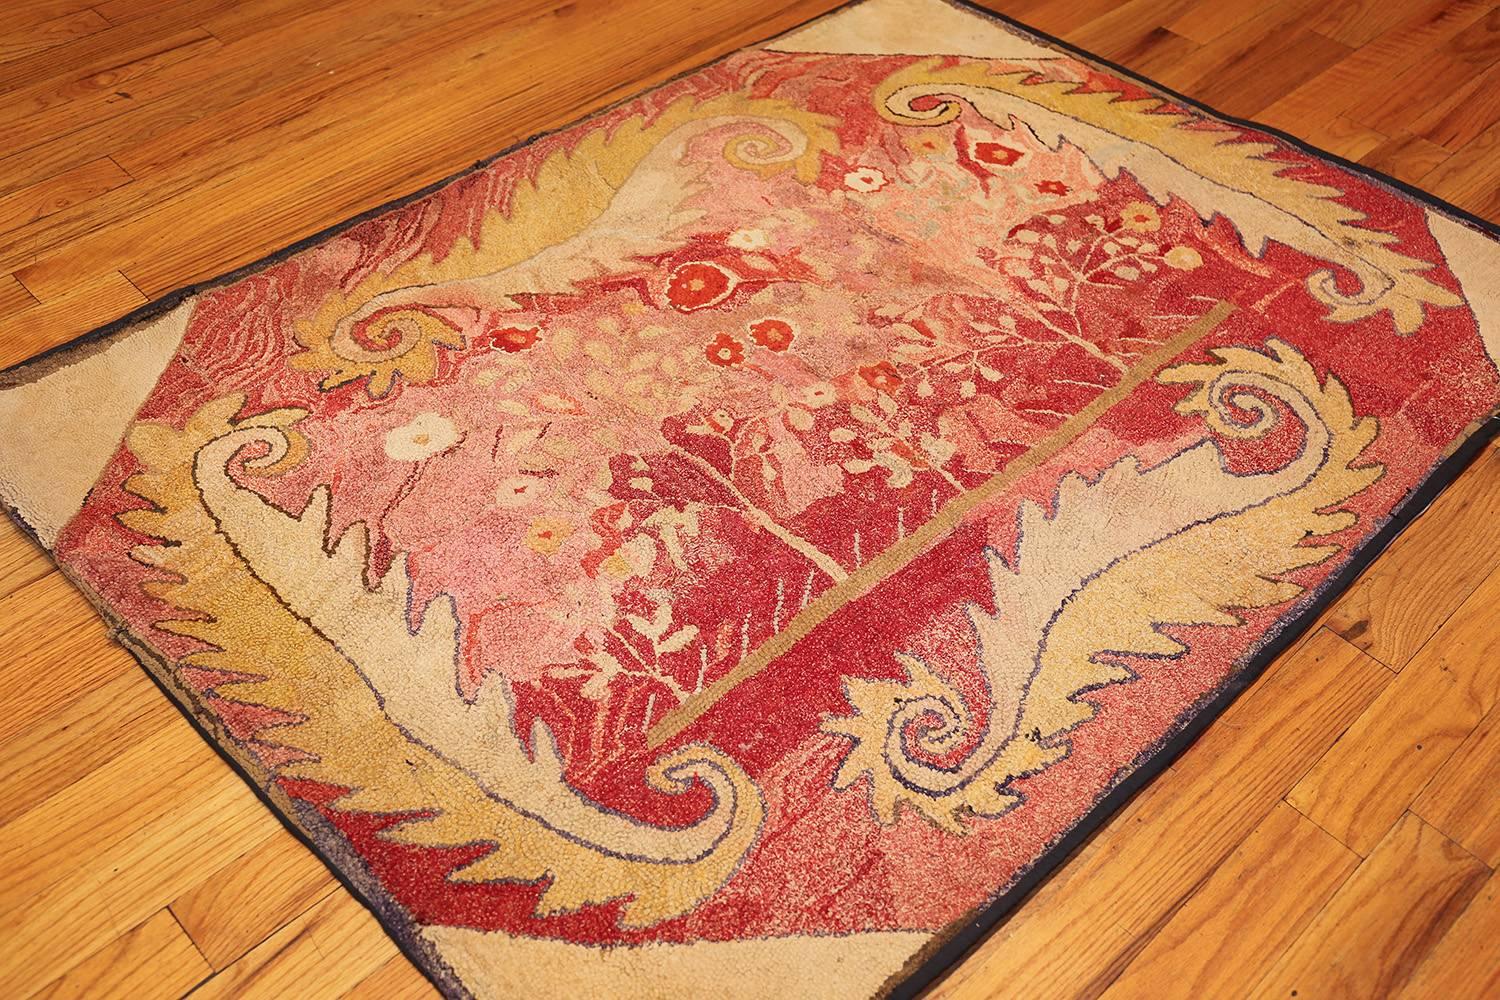 Beautiful and rare antique American hooked rug, country of origin / rug type: Antique American rugs, circa early 20th century. Shaded with the soft hues of a summer sunset, this antique American Hooked rug is a warm and welcoming piece for any cozy